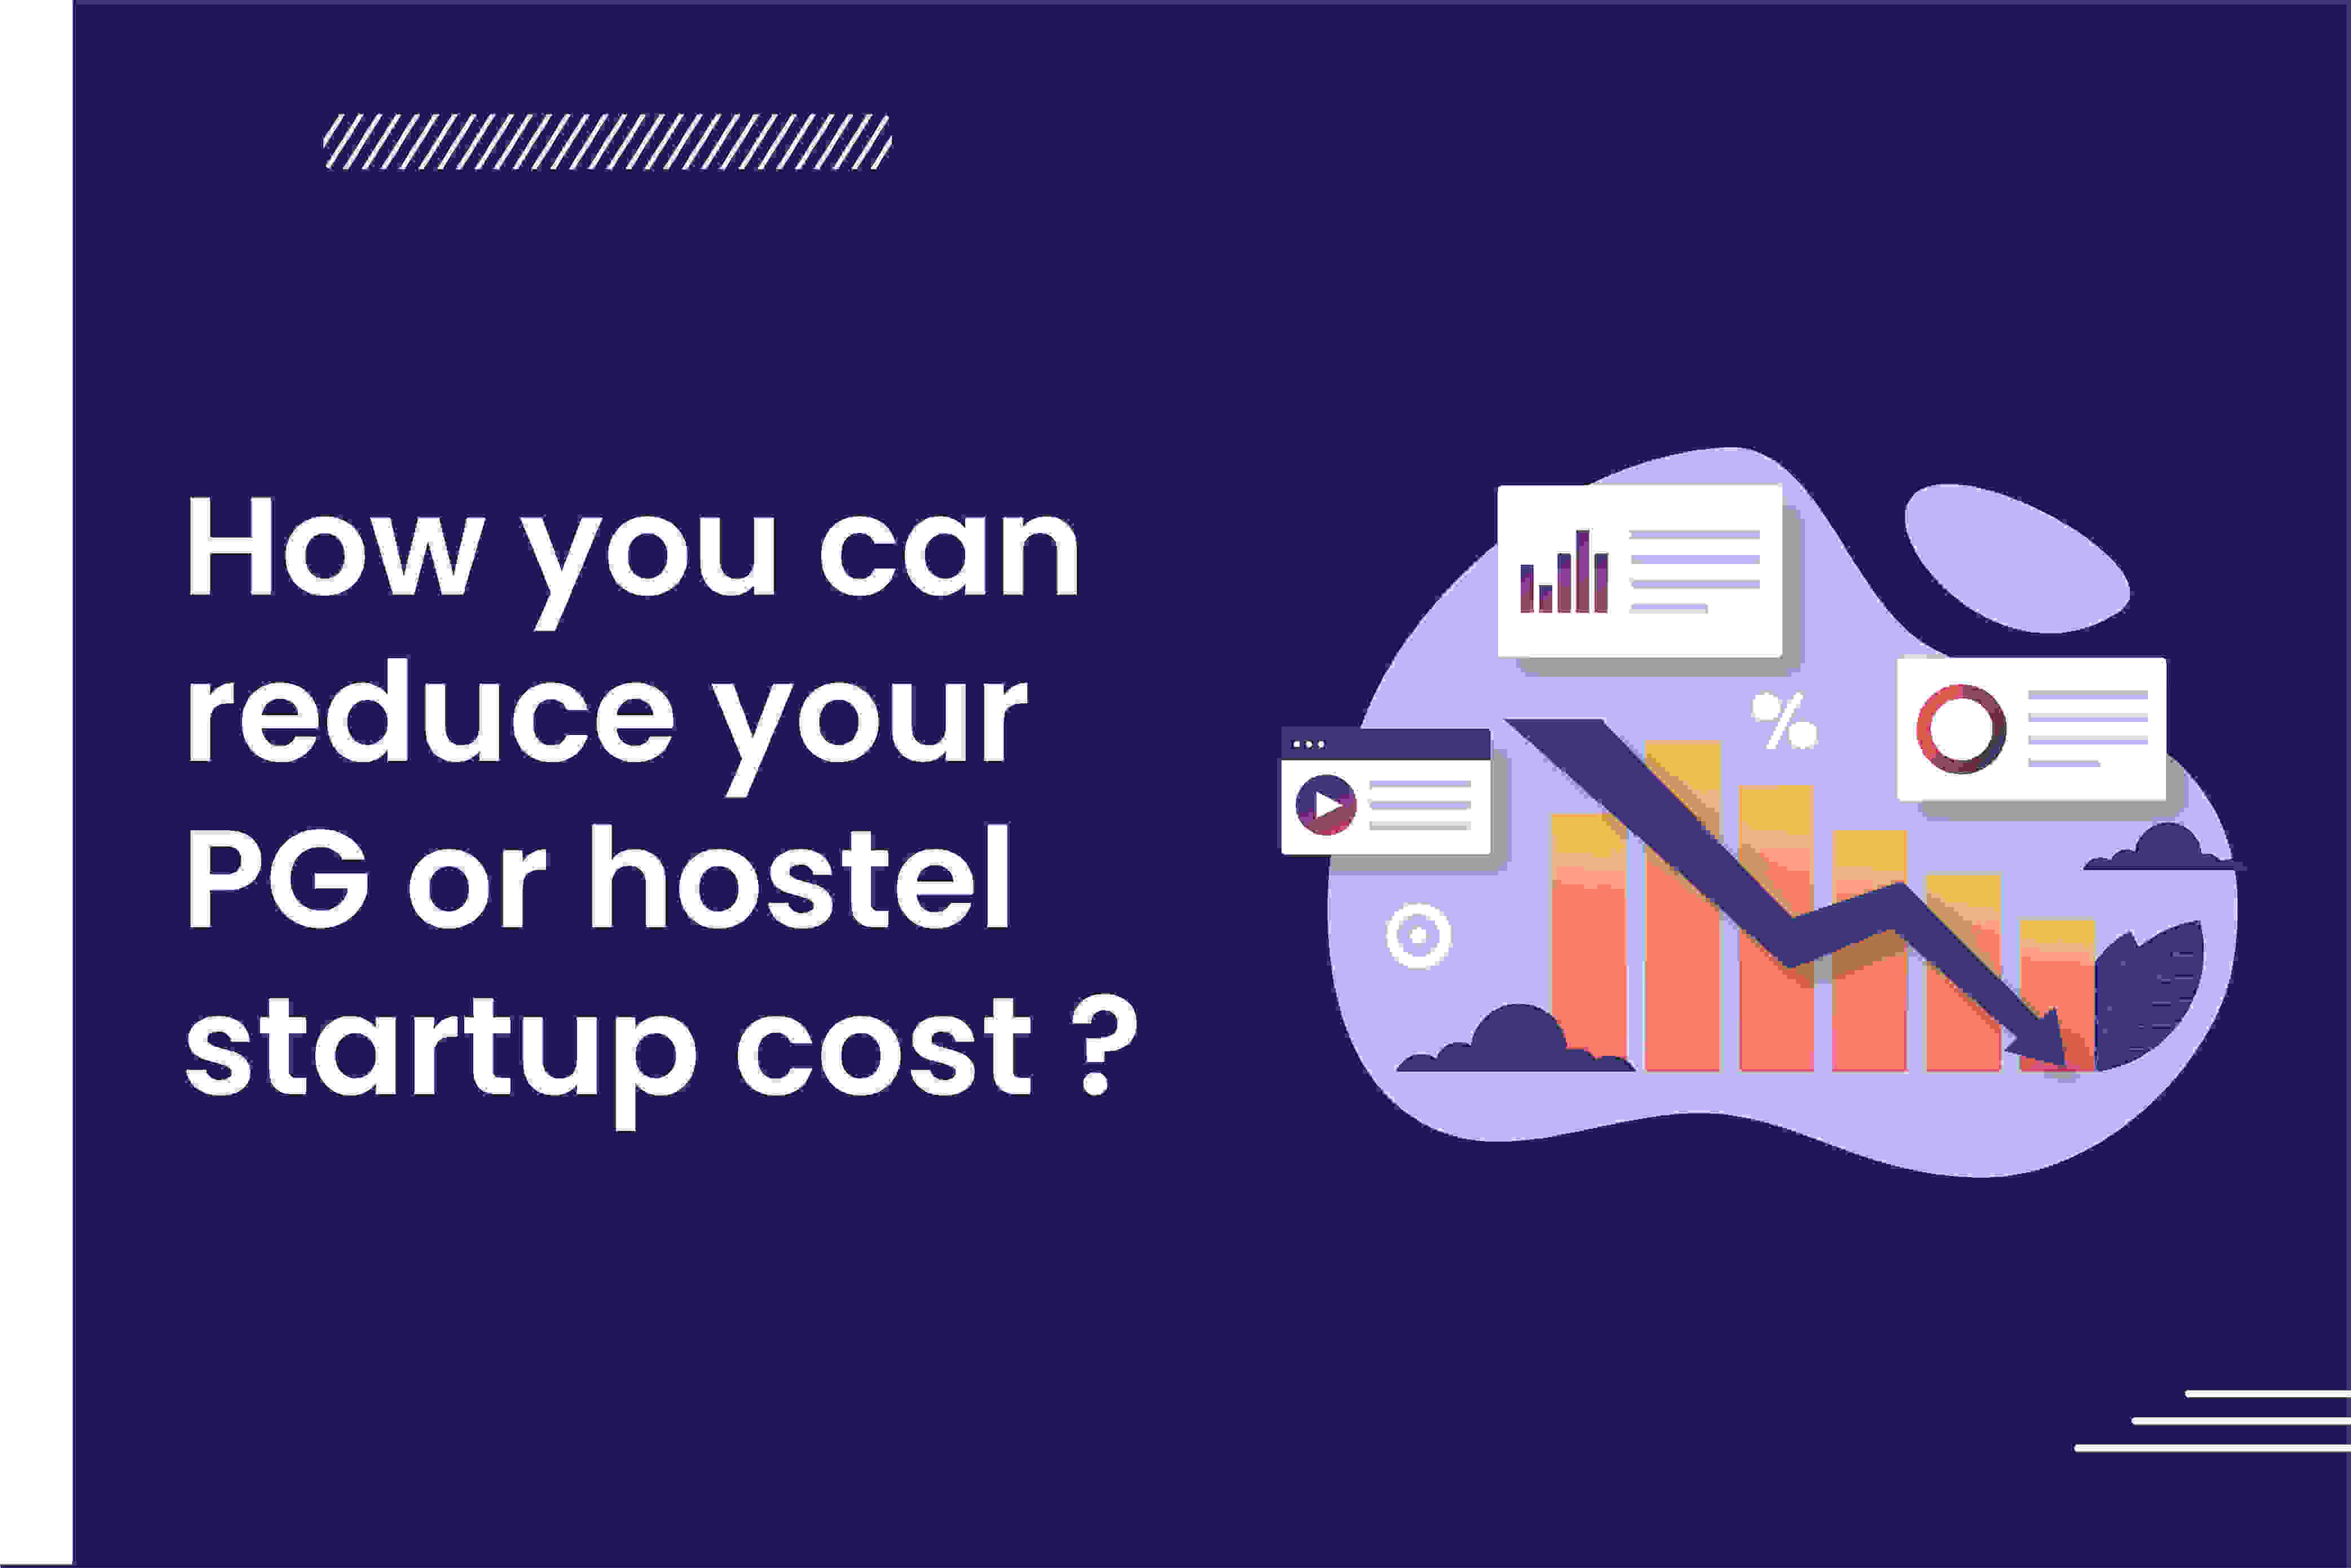 How you can reduce your PG or hostel startup cost ?  